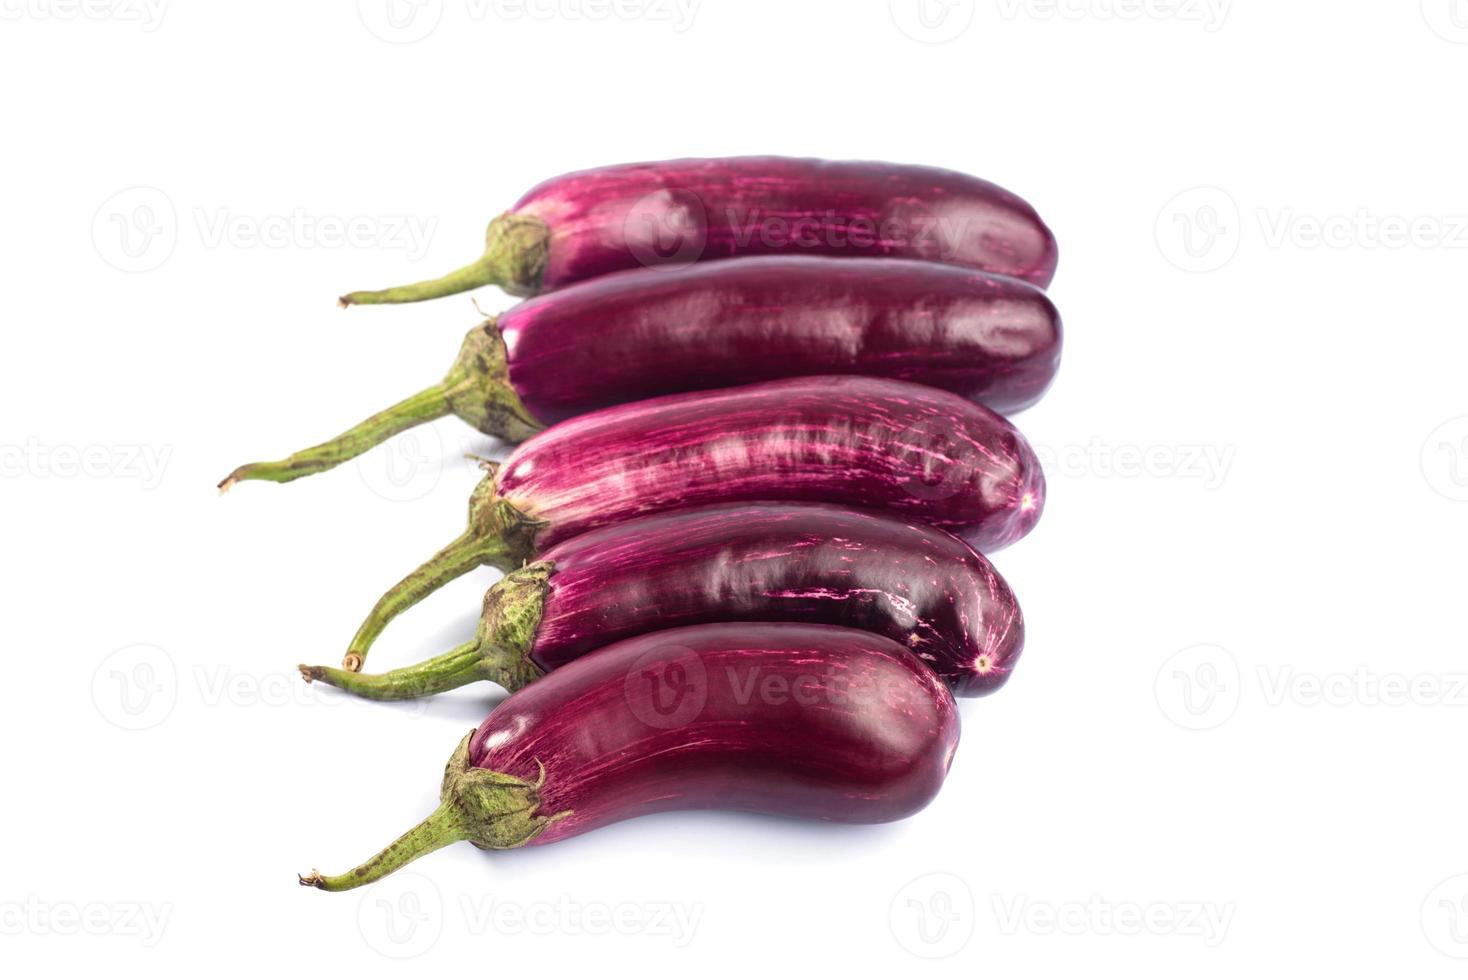 Eggplant or aubergine or brinjal vegetable isolated on a white background. photo